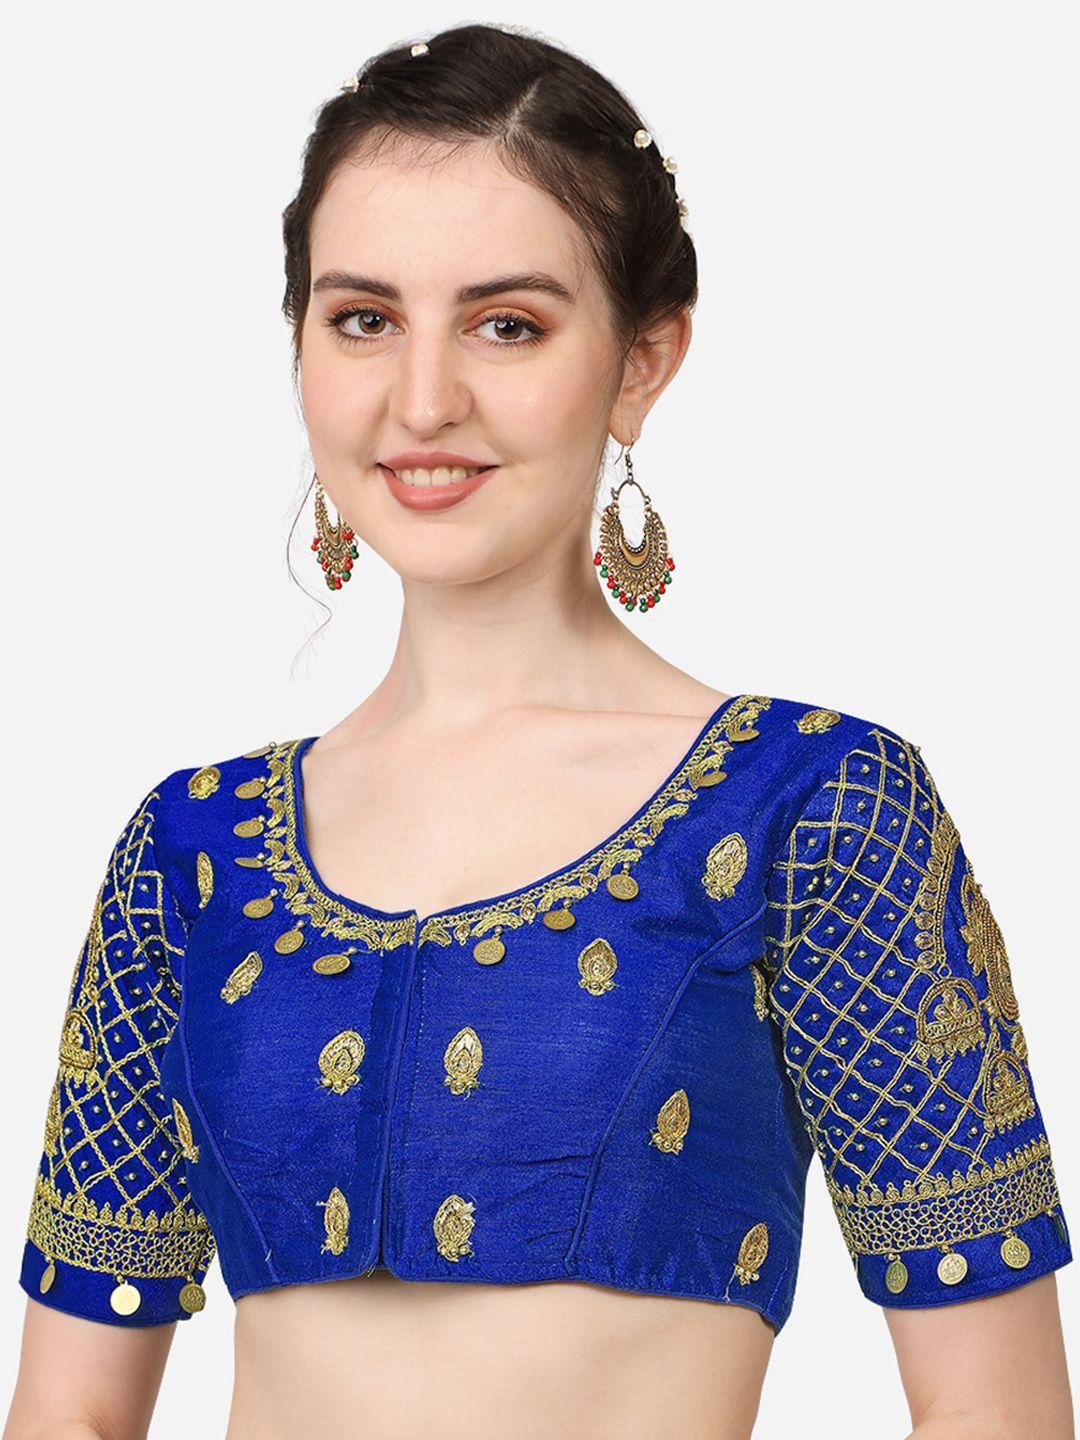 pujia mills women blue embroidered silk saree blouse